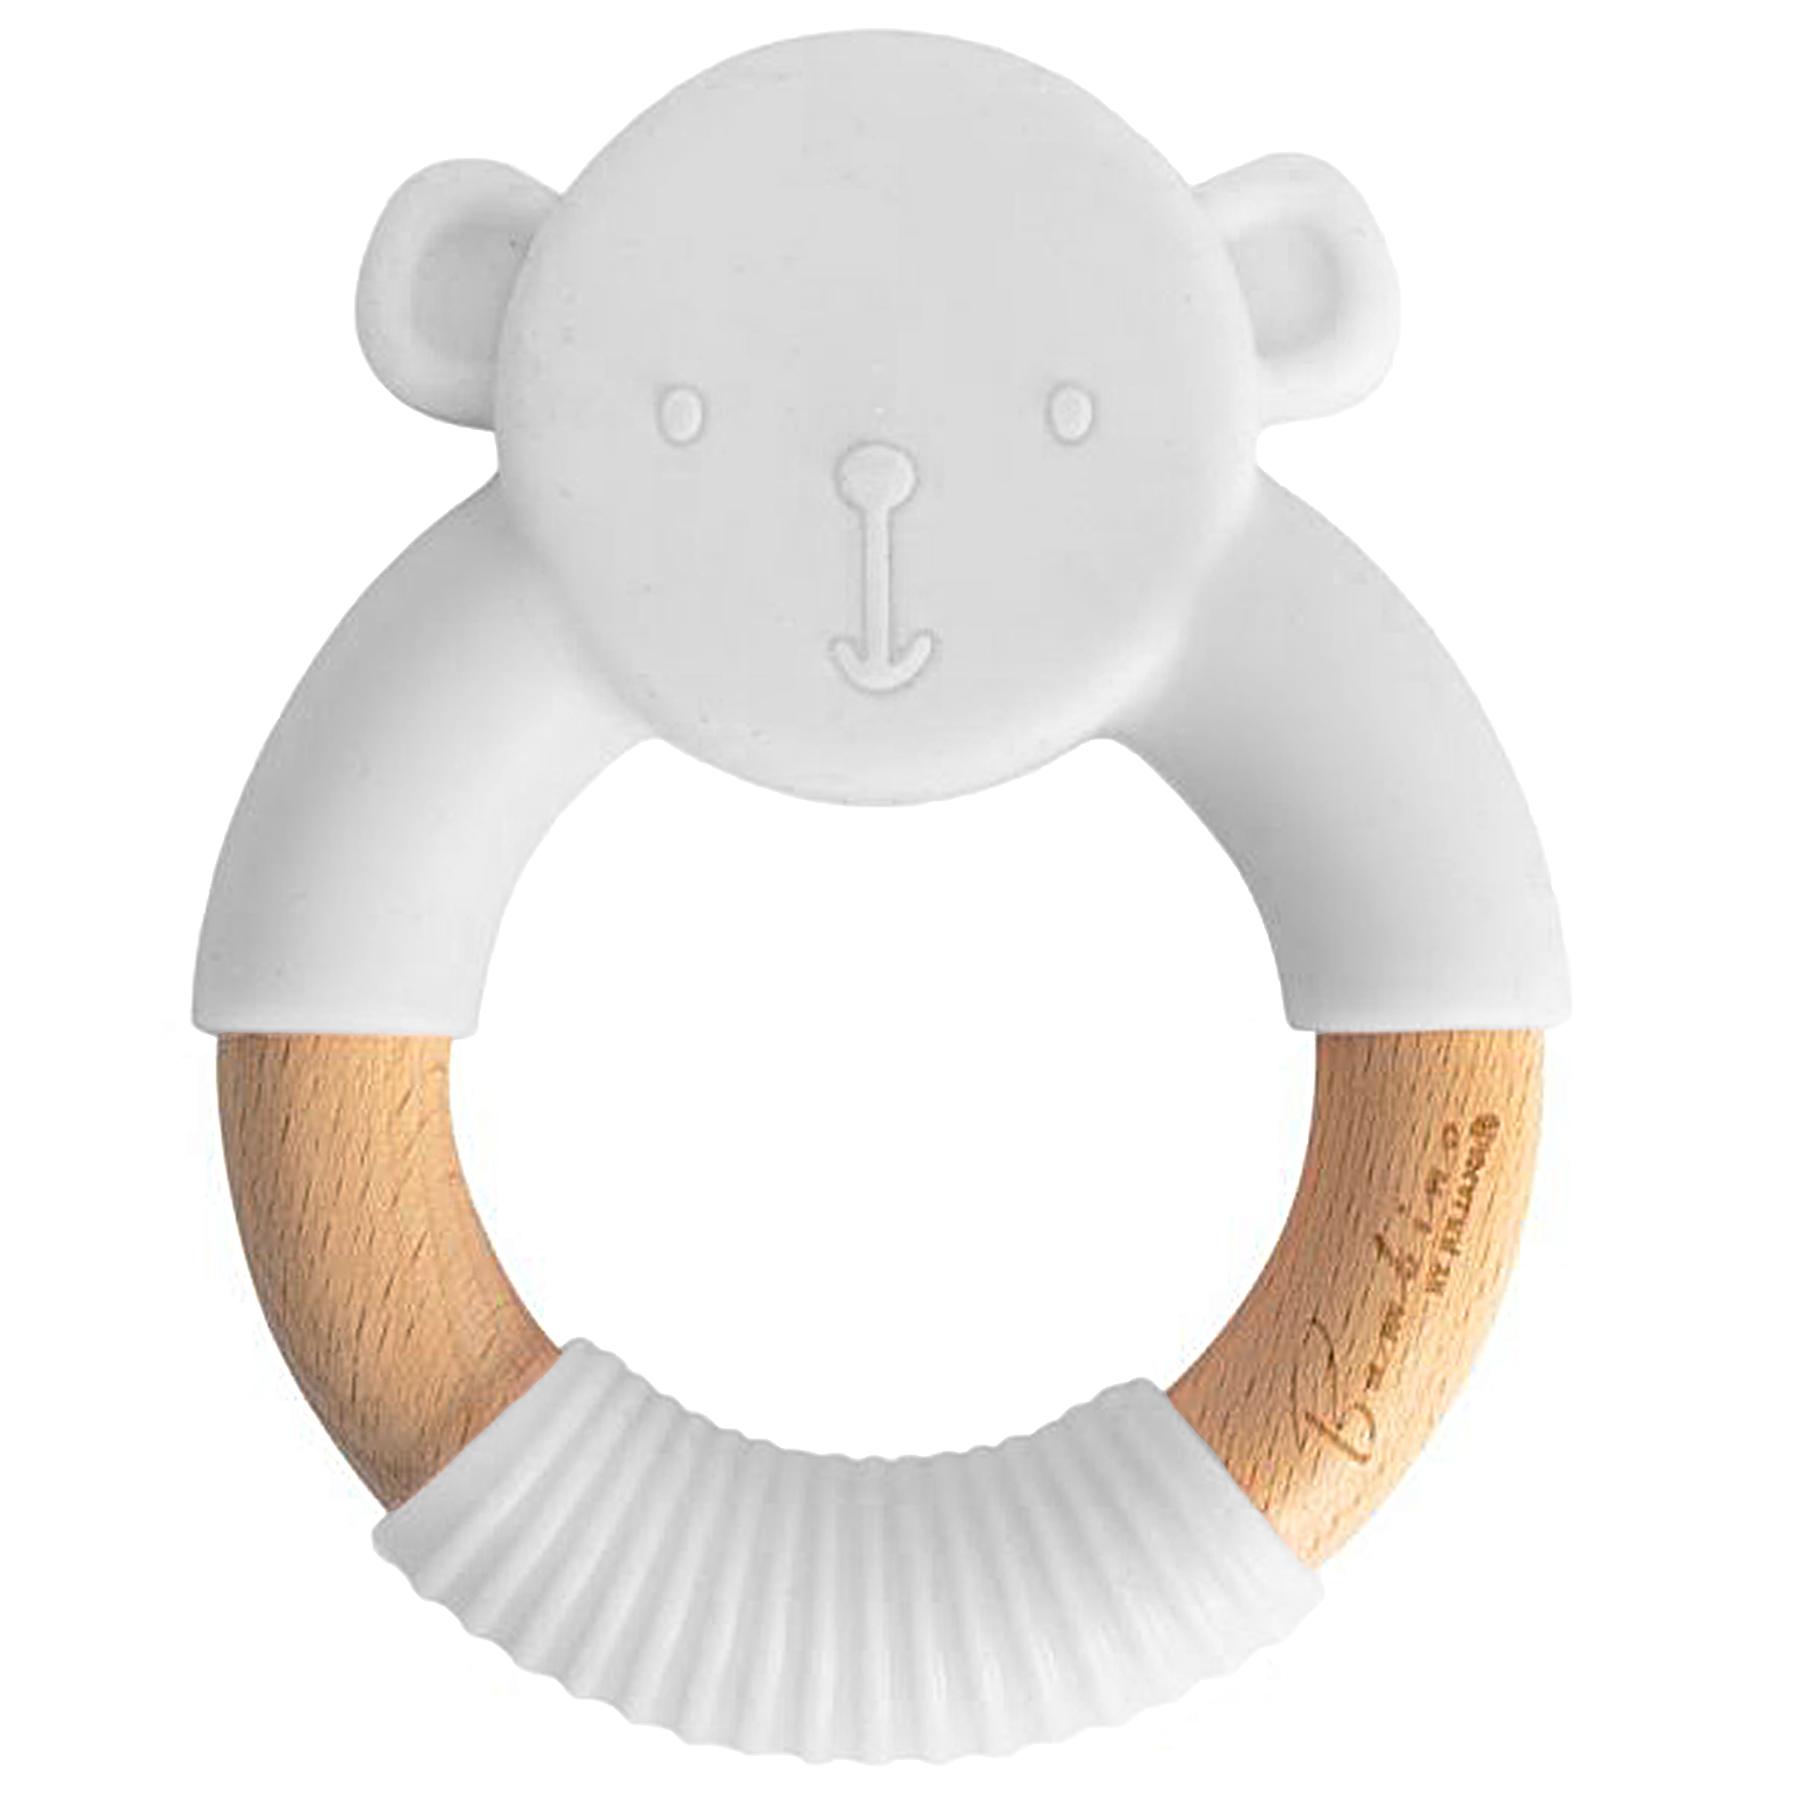 Bambino by Juliana® Round White Silicone Teddy & Wood Teether